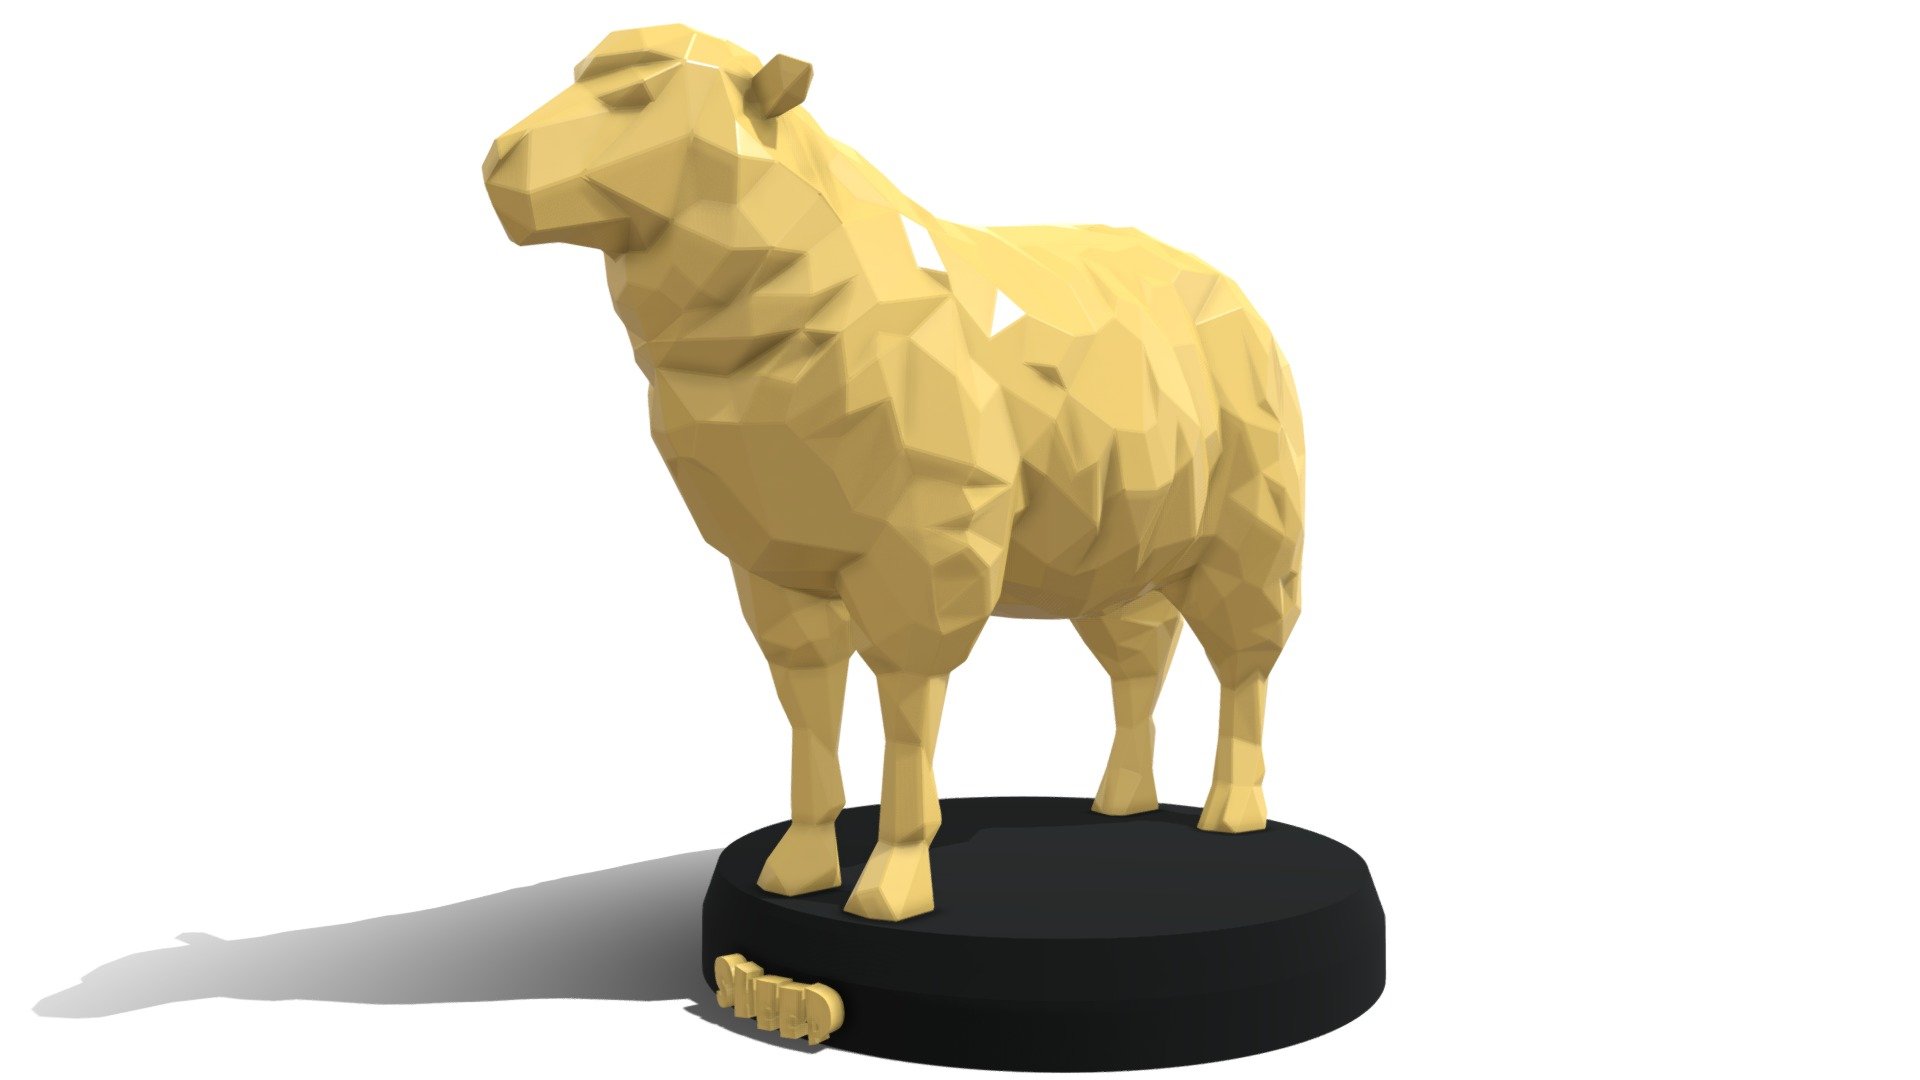 Polygonal 3D Model with Parametric modeling with gold material, make it recommend for :




Basic modeling 

Rigging 

sculpting 

Become Statue

Decorate

3D Print File

Toy

Have fun  :) - Poly Sheep - Buy Royalty Free 3D model by Puppy3D 3d model